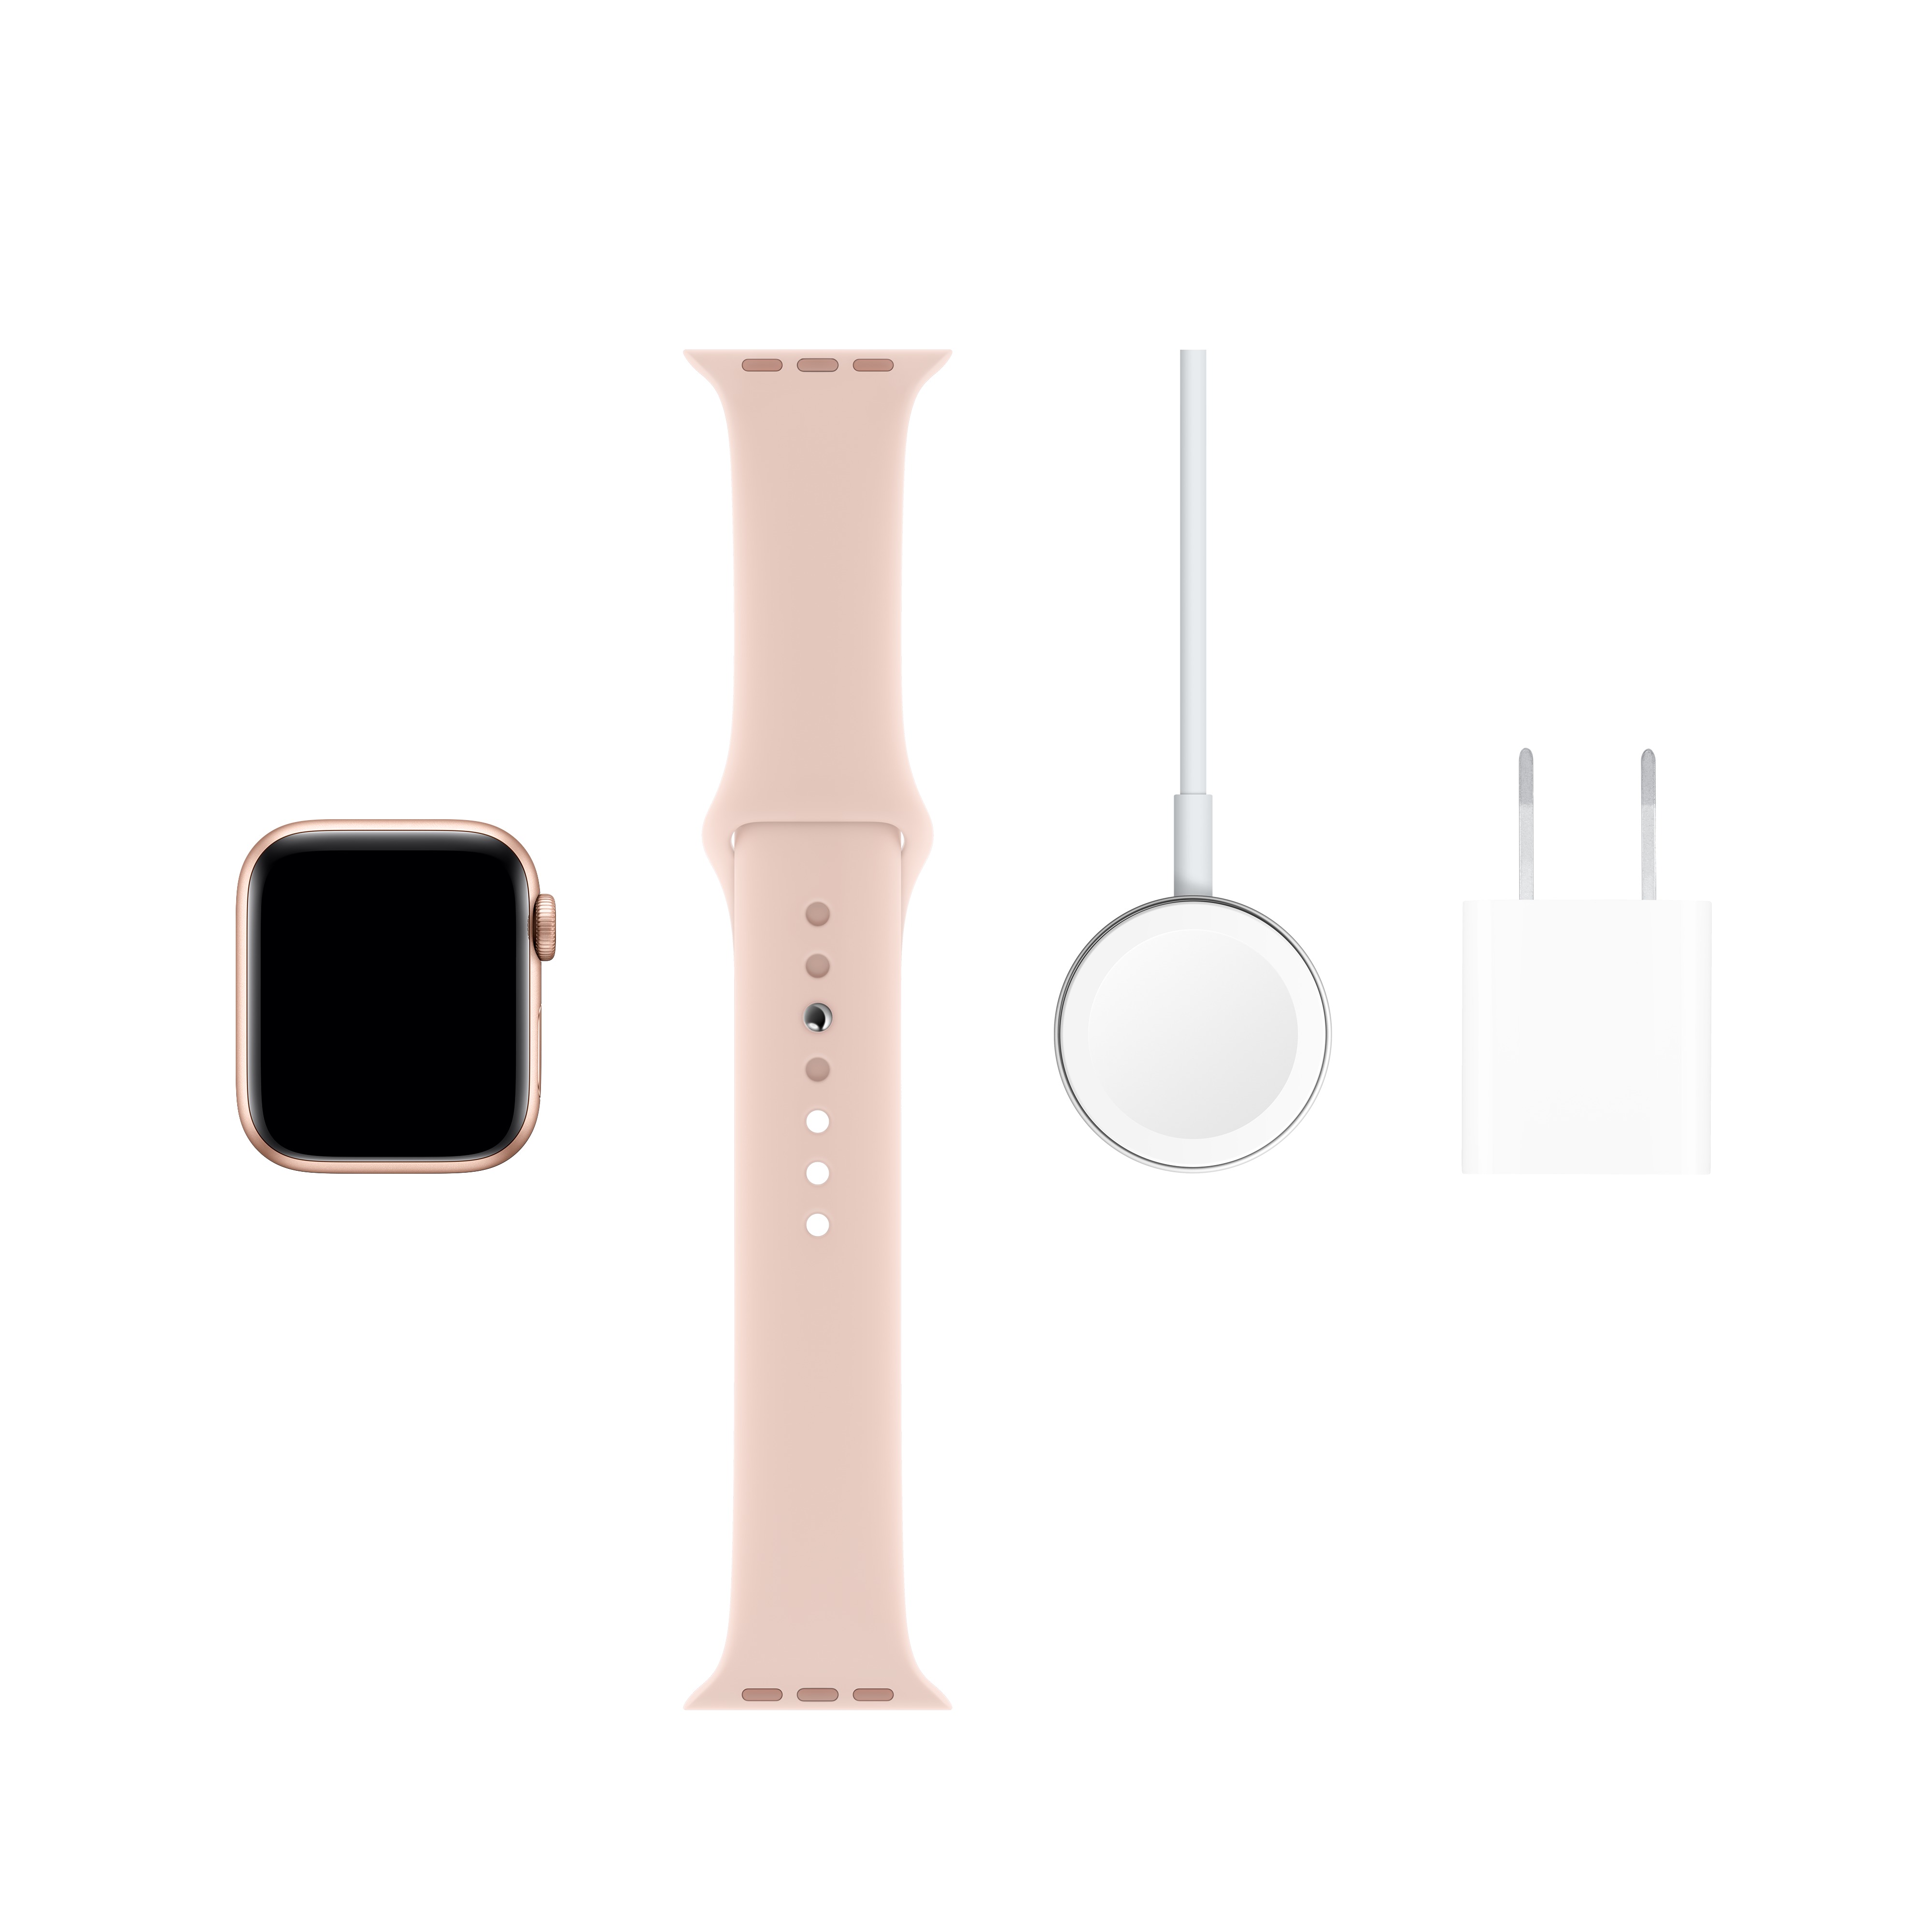 Apple Watch Series 5 GPS, 40mm Gold Aluminum Case with Pink Sand Sport Band - S/M & M/L - image 6 of 6